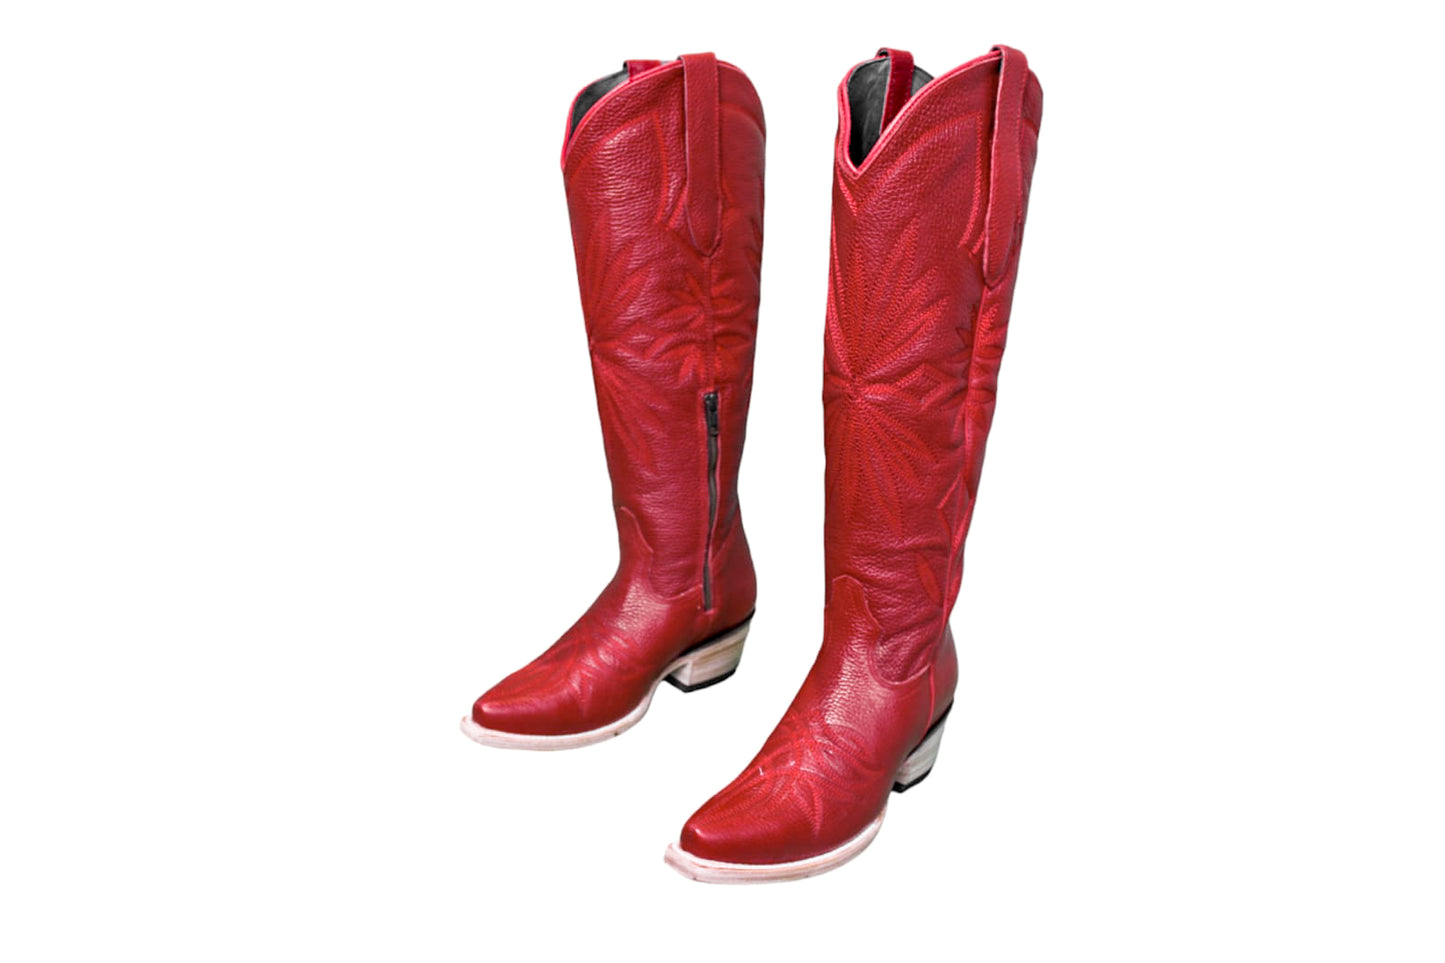 The Lorraine Knee-high Boots - Red